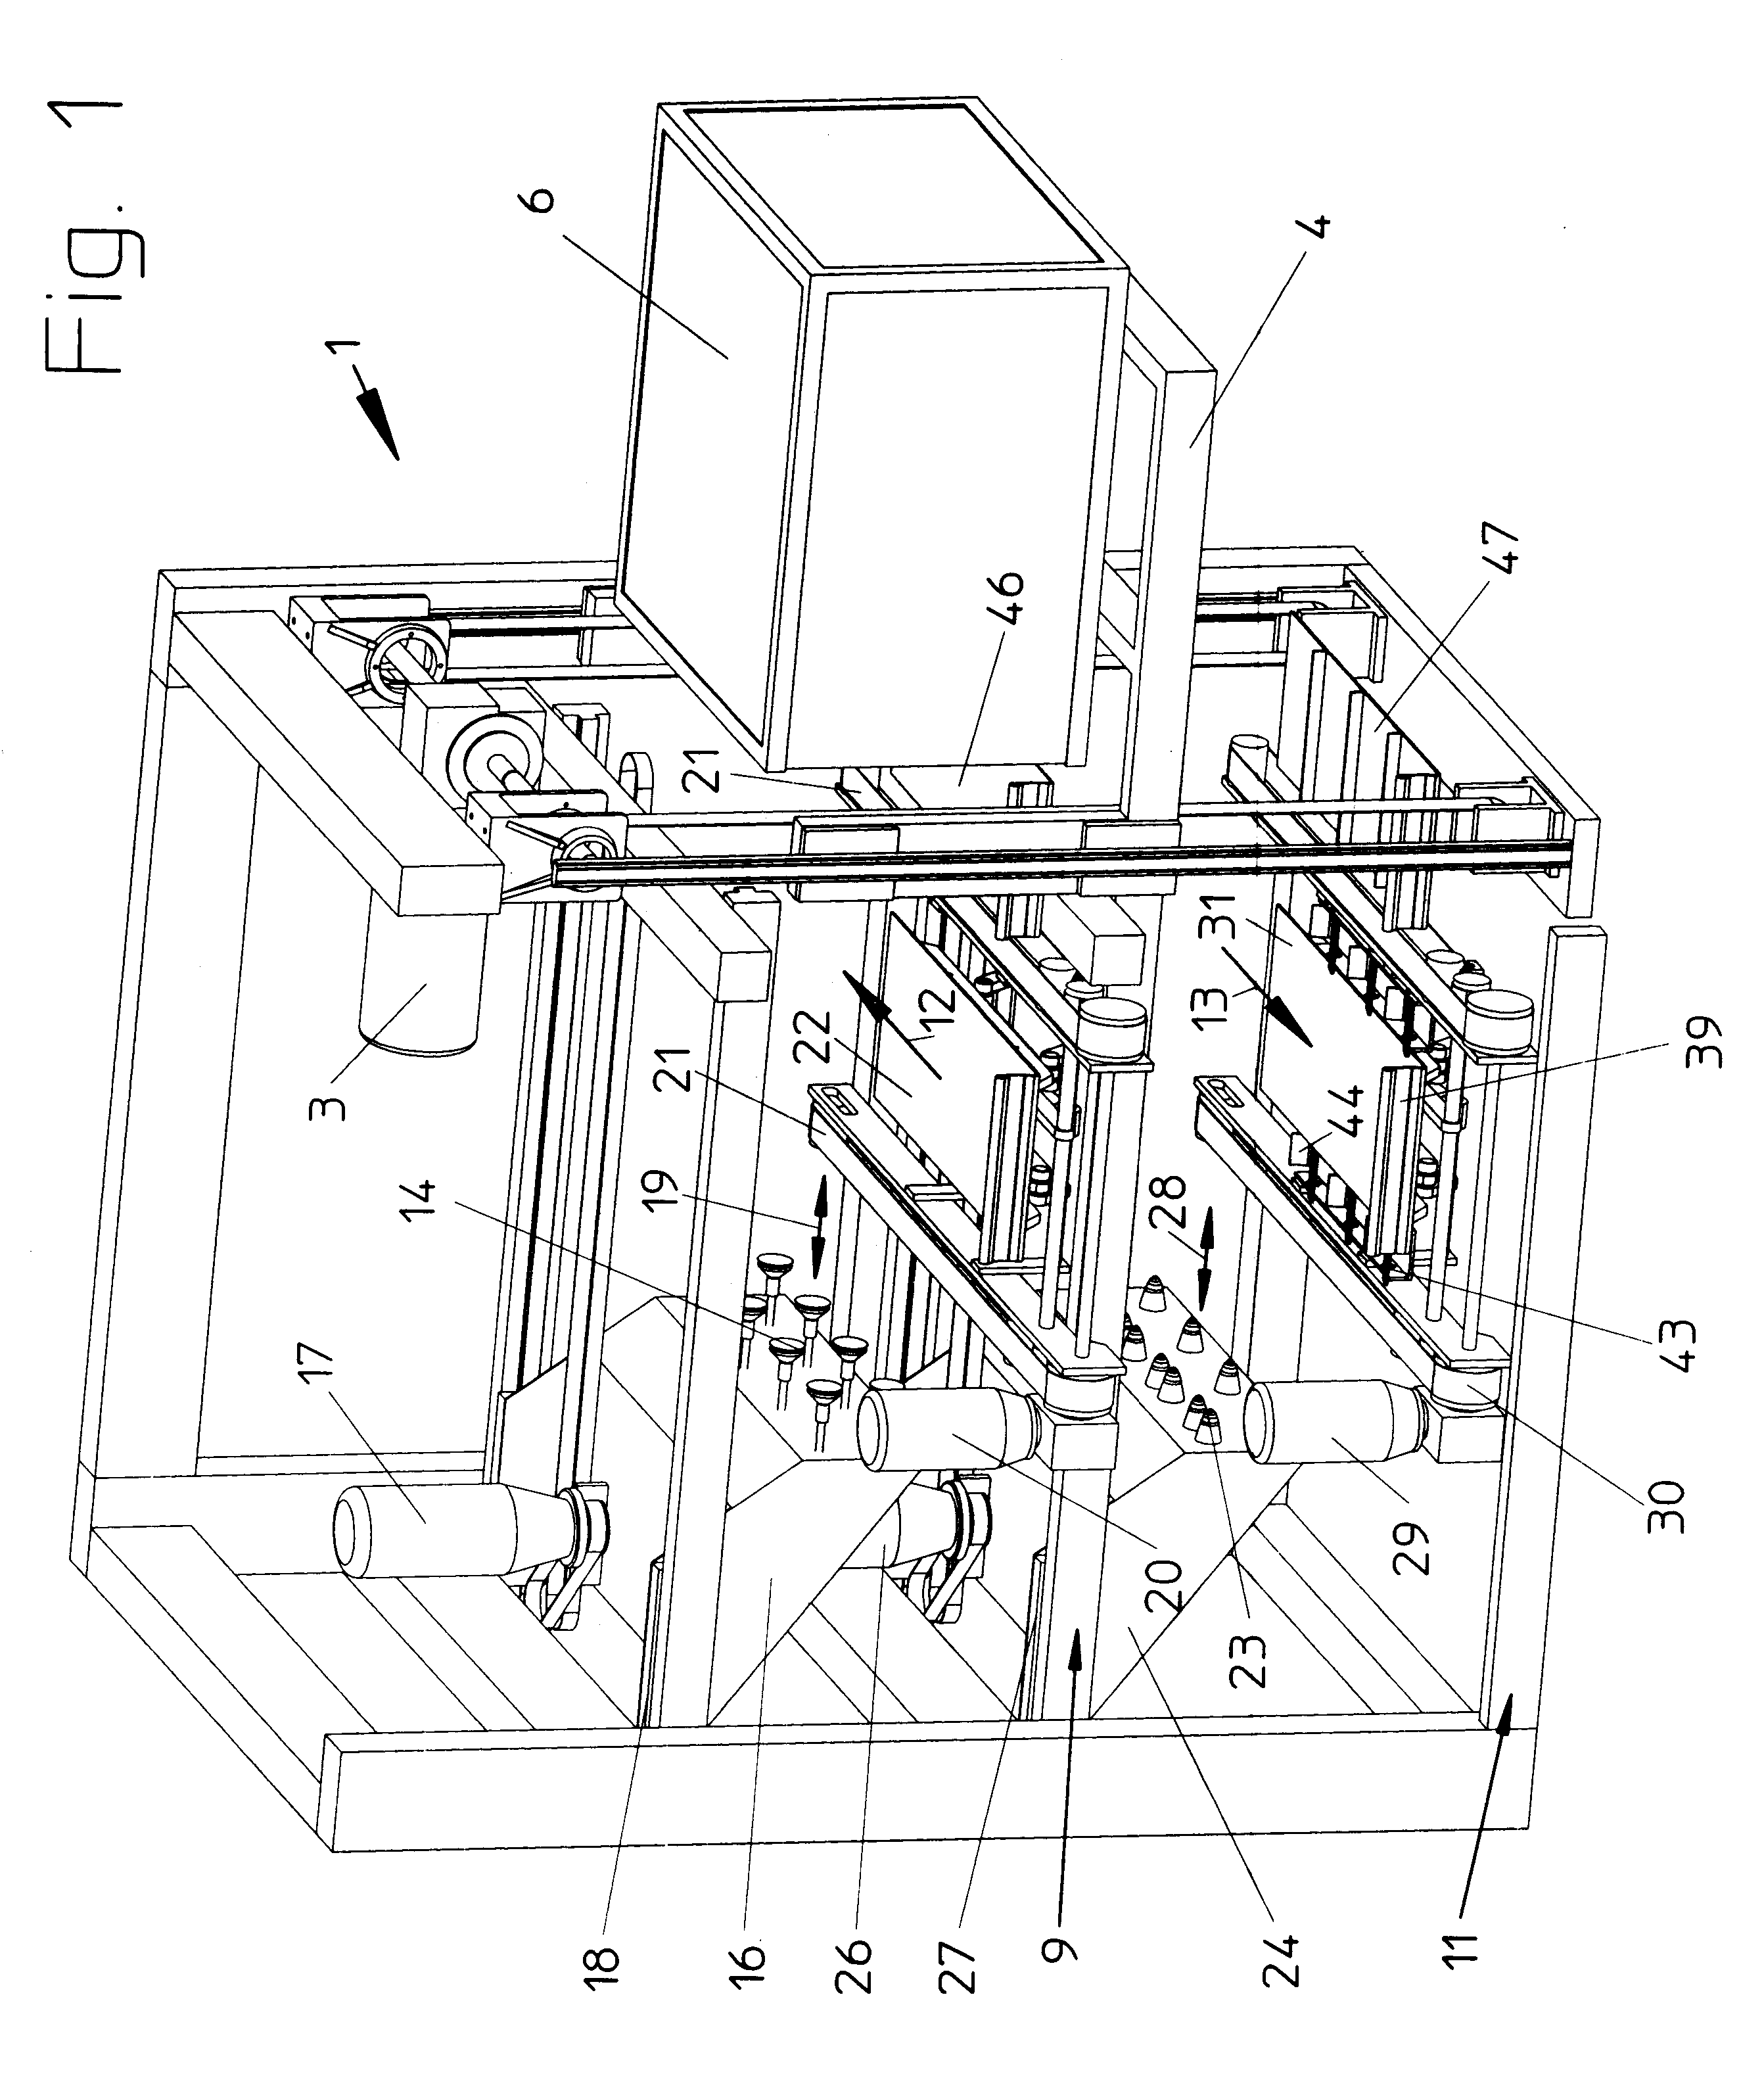 Method of and apparatus for manipulating cigarette trays